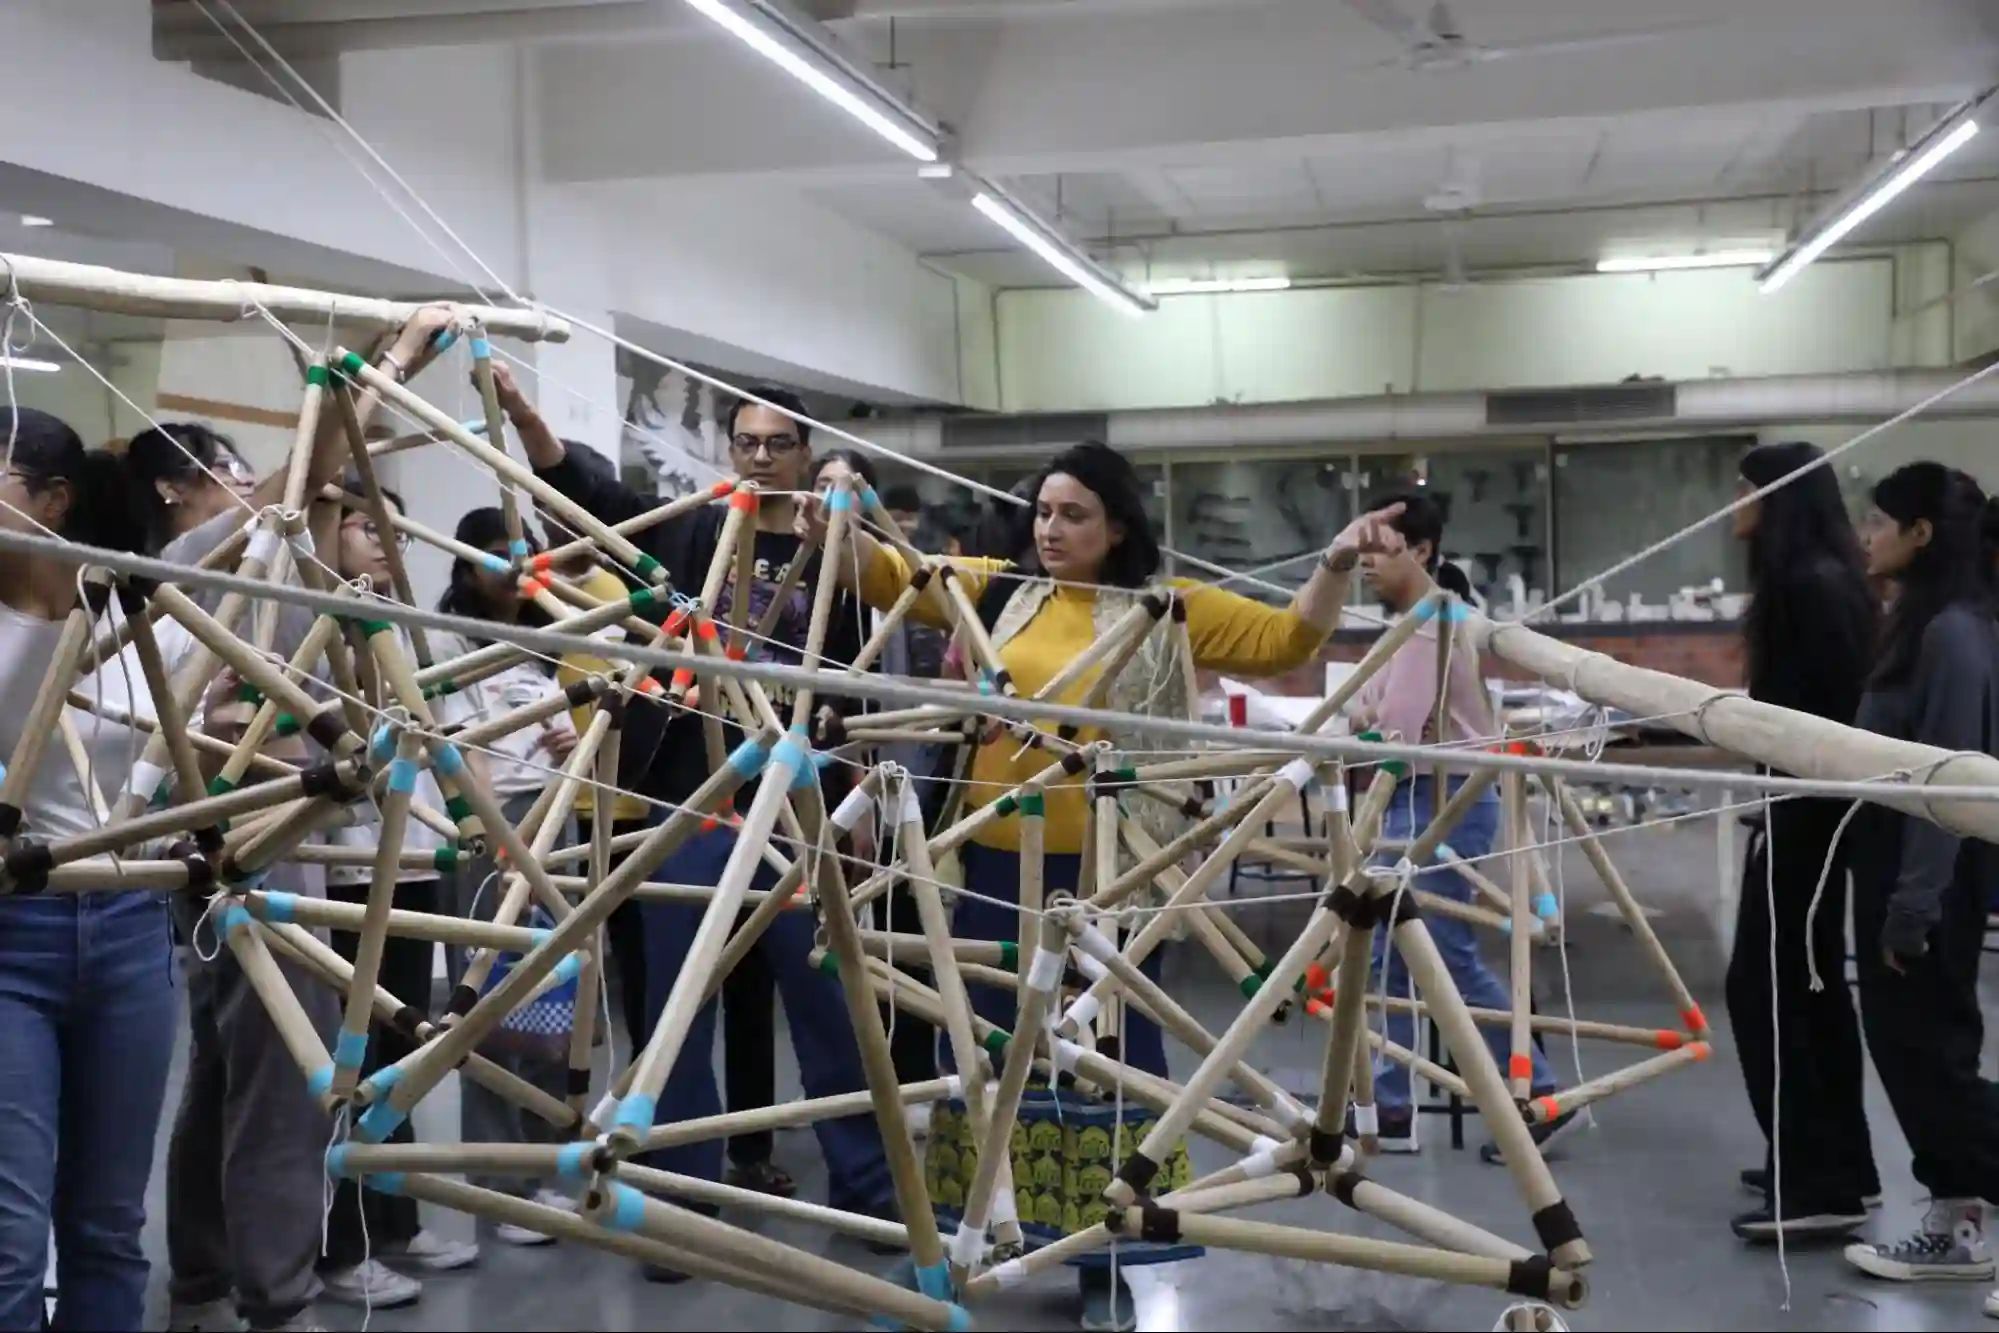 Making of the modular structure of installation by IAD students and faculty